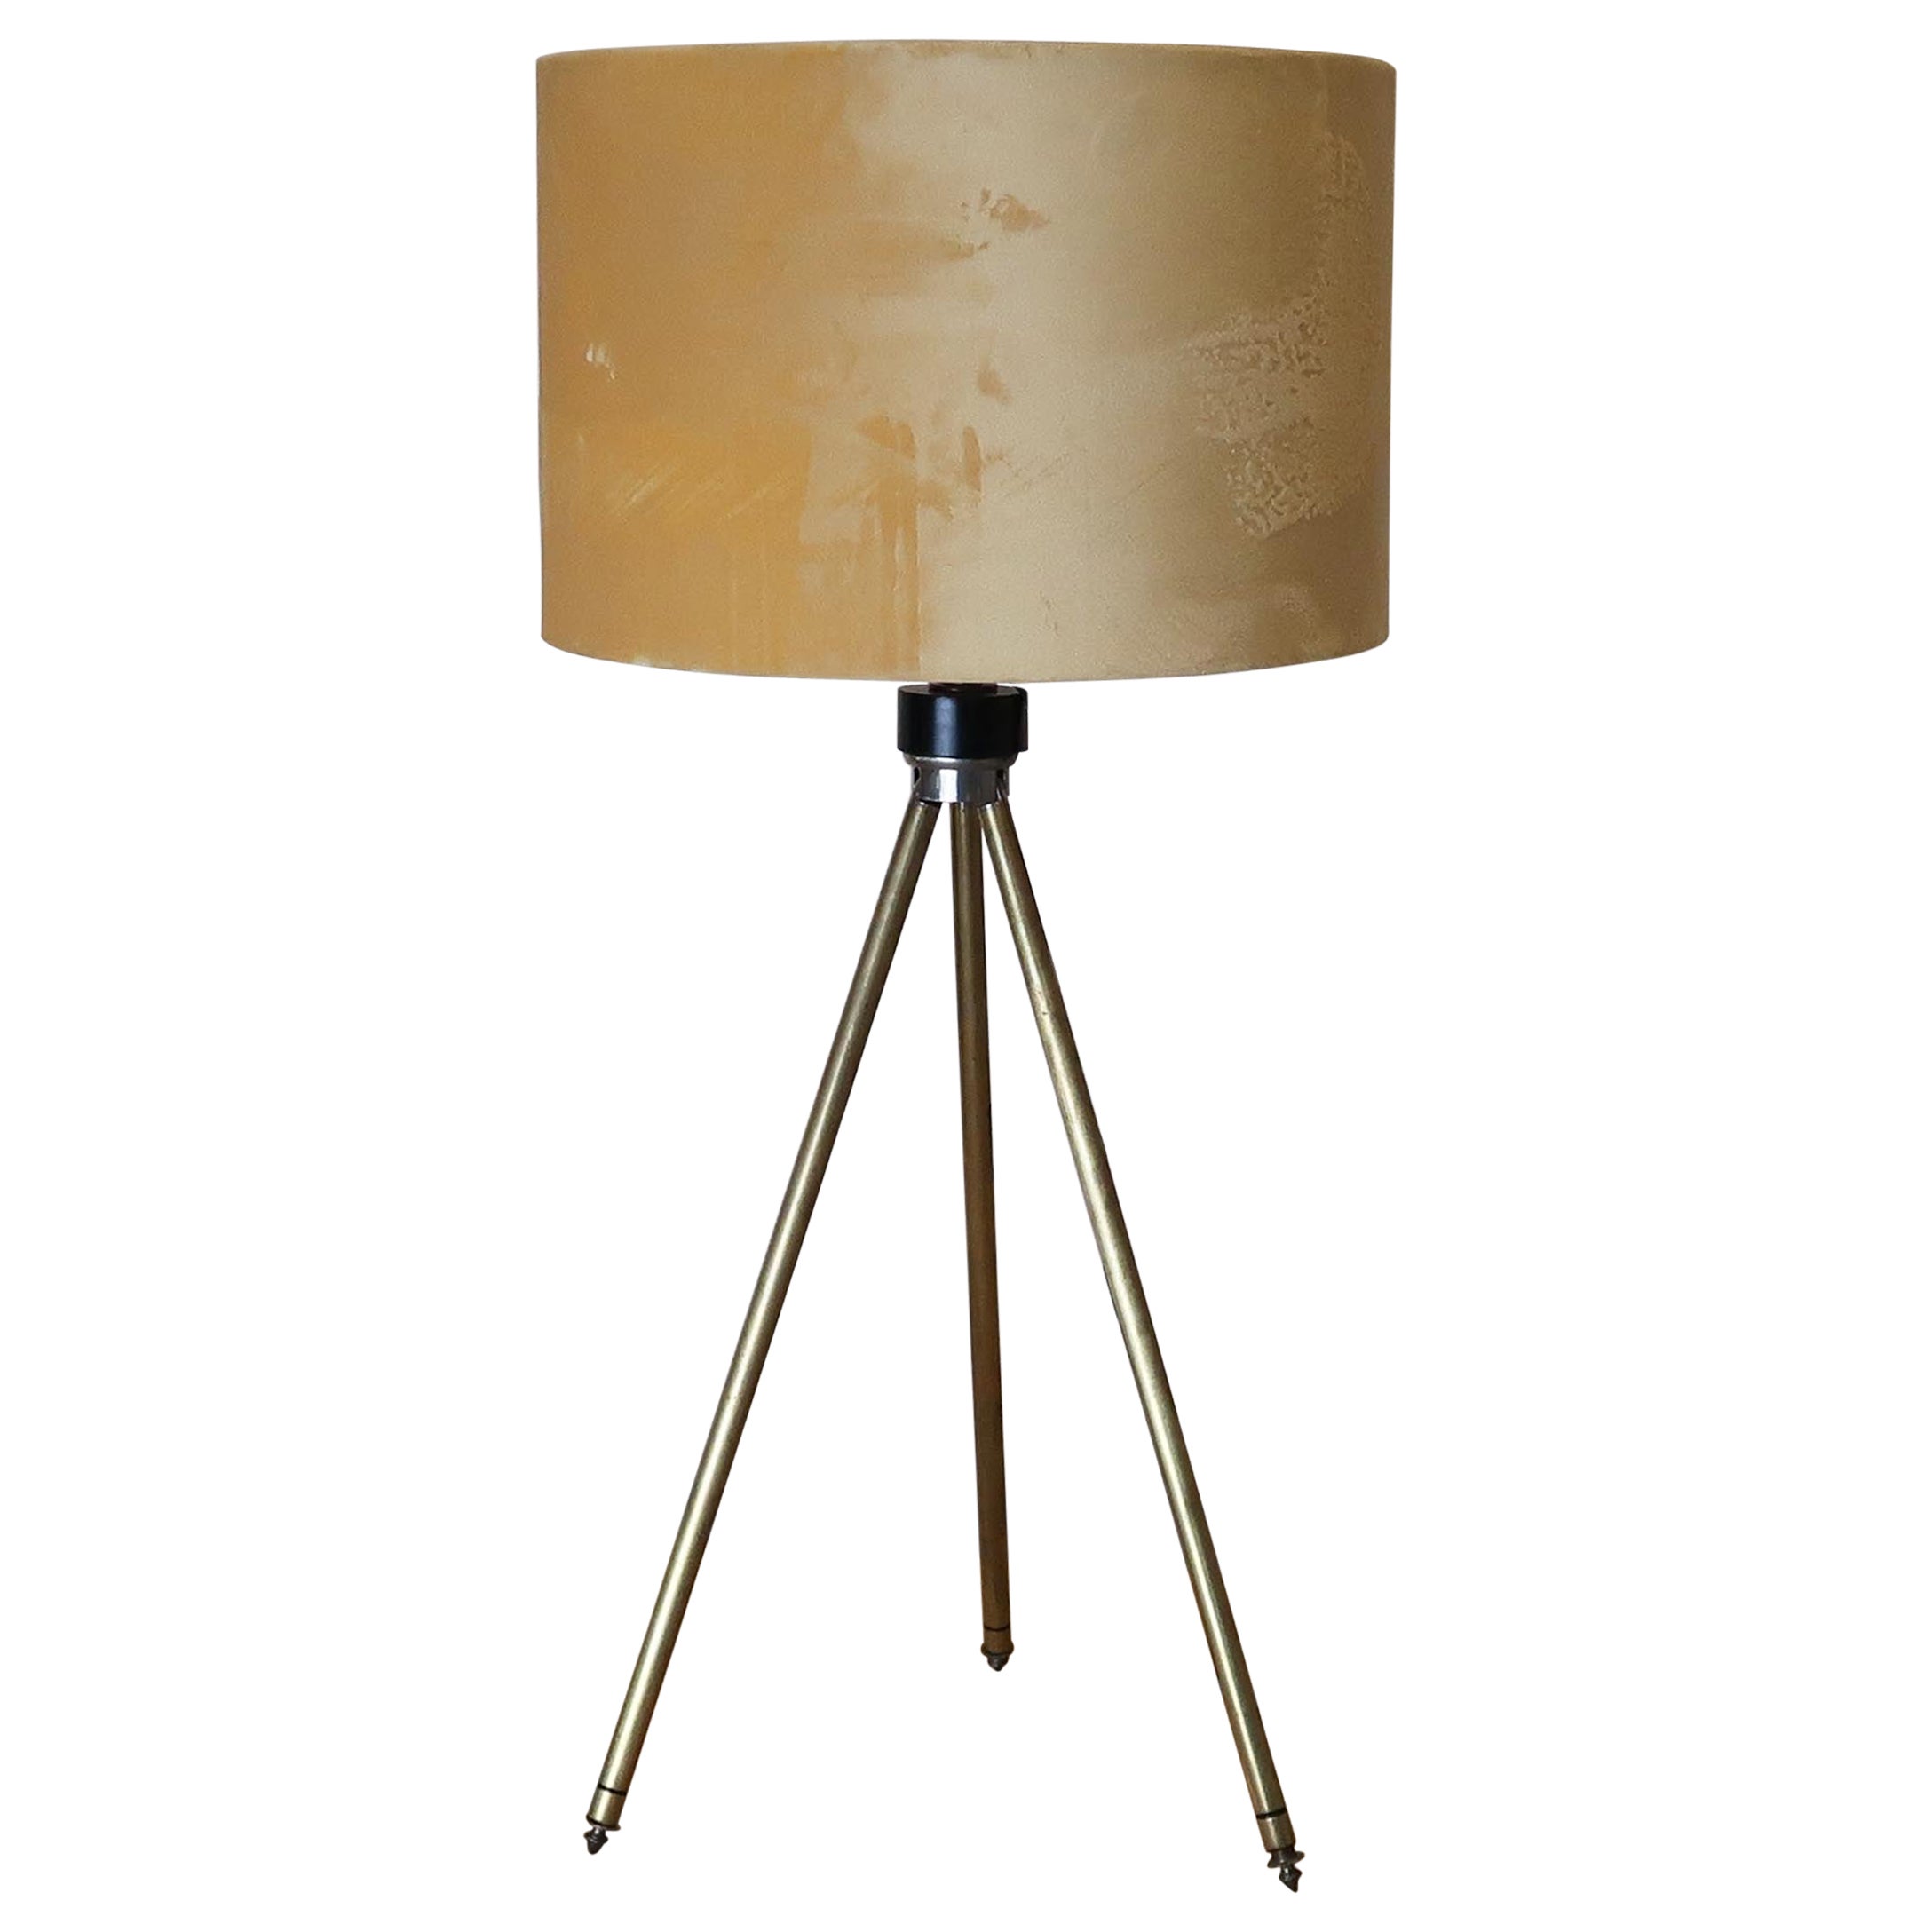 Midcentury Brass Telescopic Tripod Table Lamp For Sale